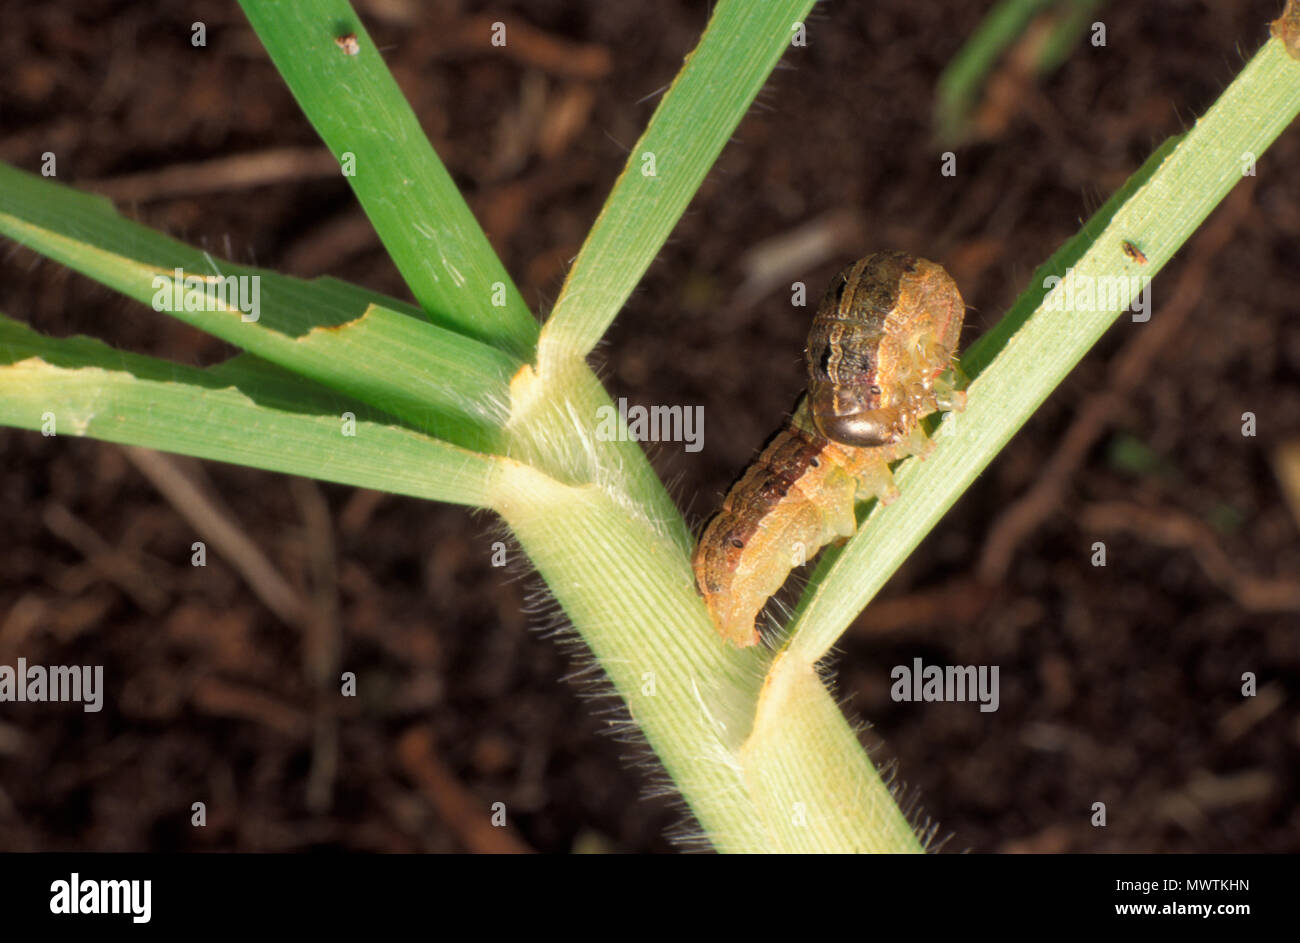 LAWN ARMYWORM (SPODOPTERA MAURITIA) ATTACKS GRASS AND SWEET CORN Stock Photo